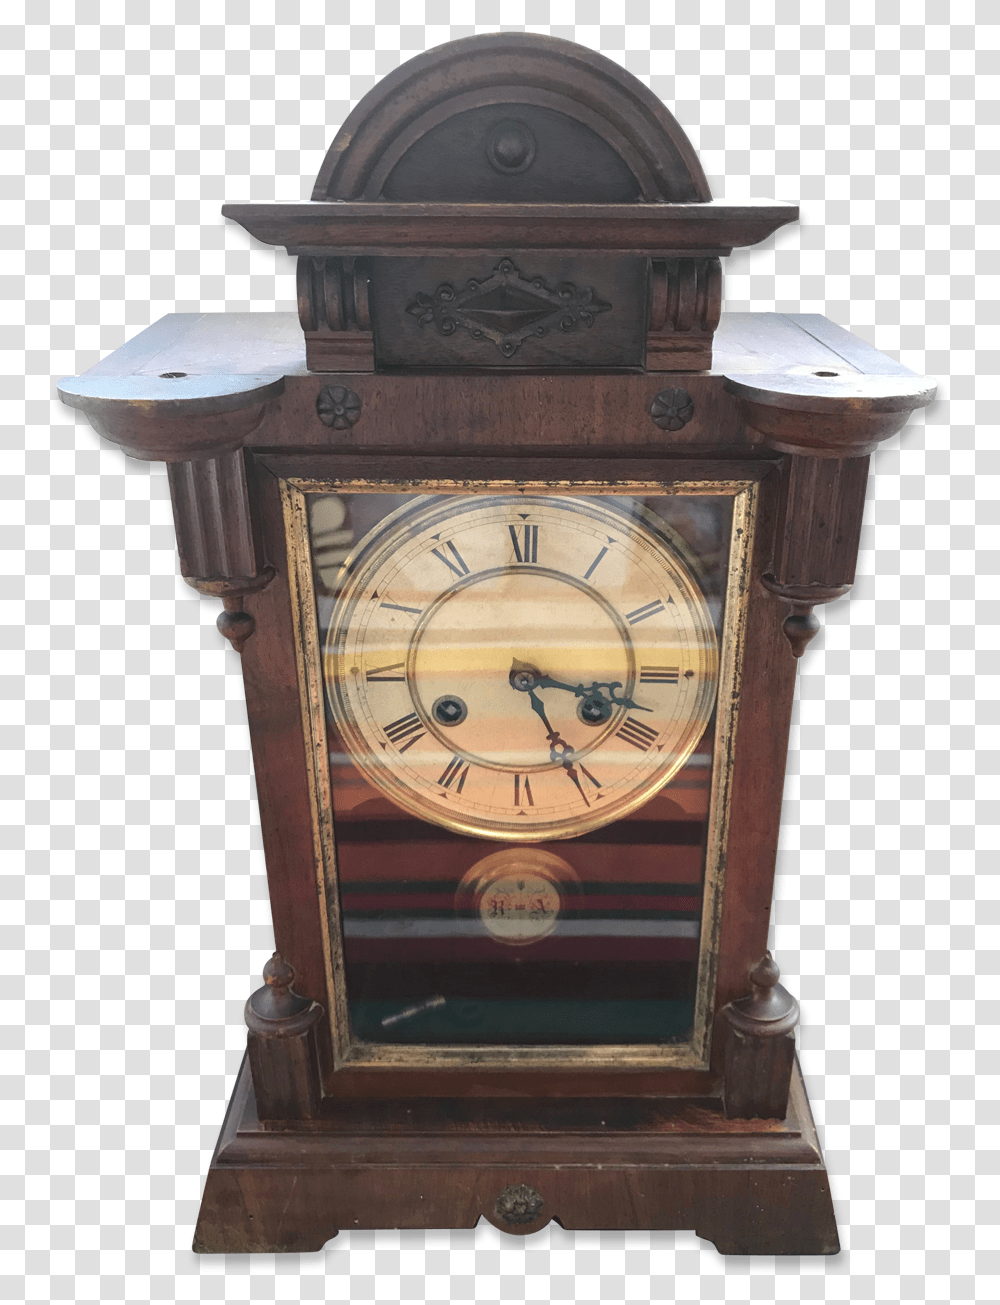 Old Clock From ChimneyquotSrcquothttps Quartz Clock, Analog Clock, Clock Tower, Architecture, Building Transparent Png